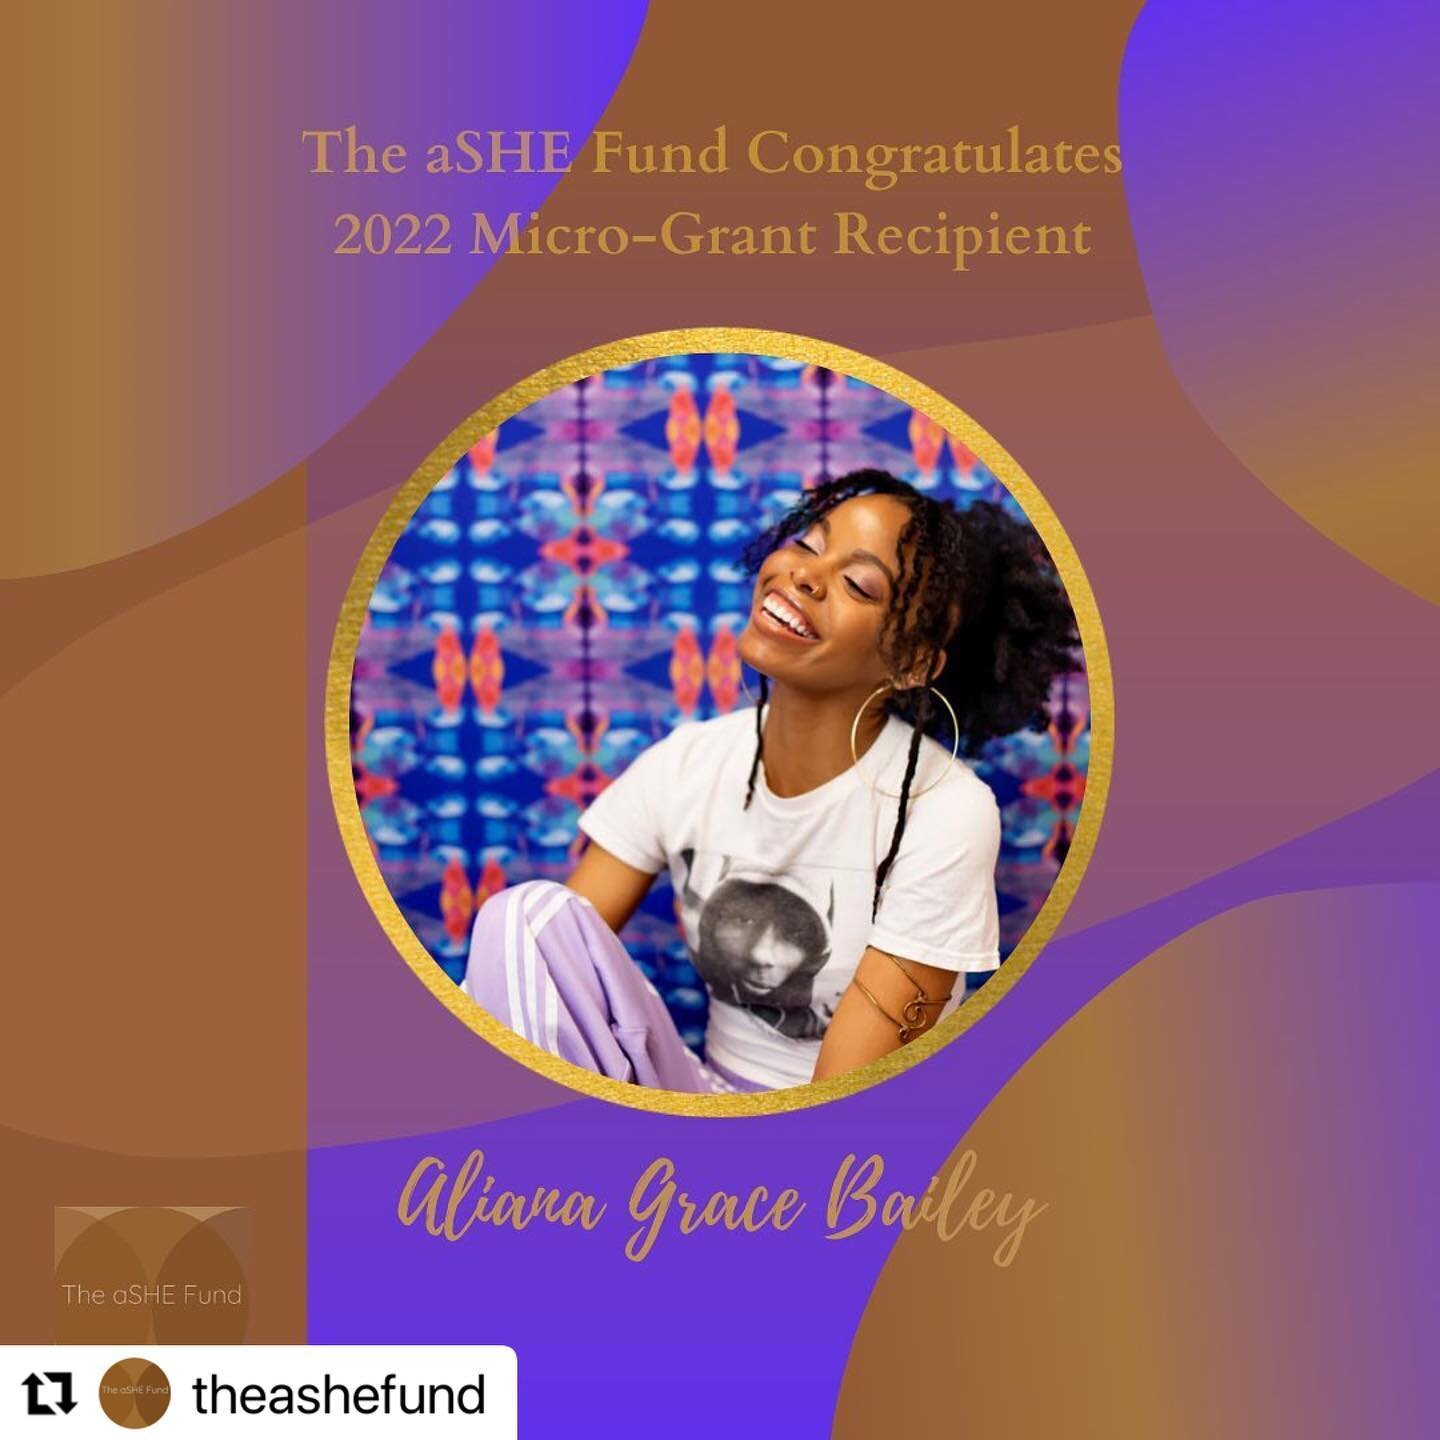 #Repost @theashefund with @make_repost
・・・
Congrats again to all of our 2022 Grant Recipients. Please follow, check out and support these dope phenomenal Black women creatives. Cheers again to our amazing and patient grant review board. A big thank y